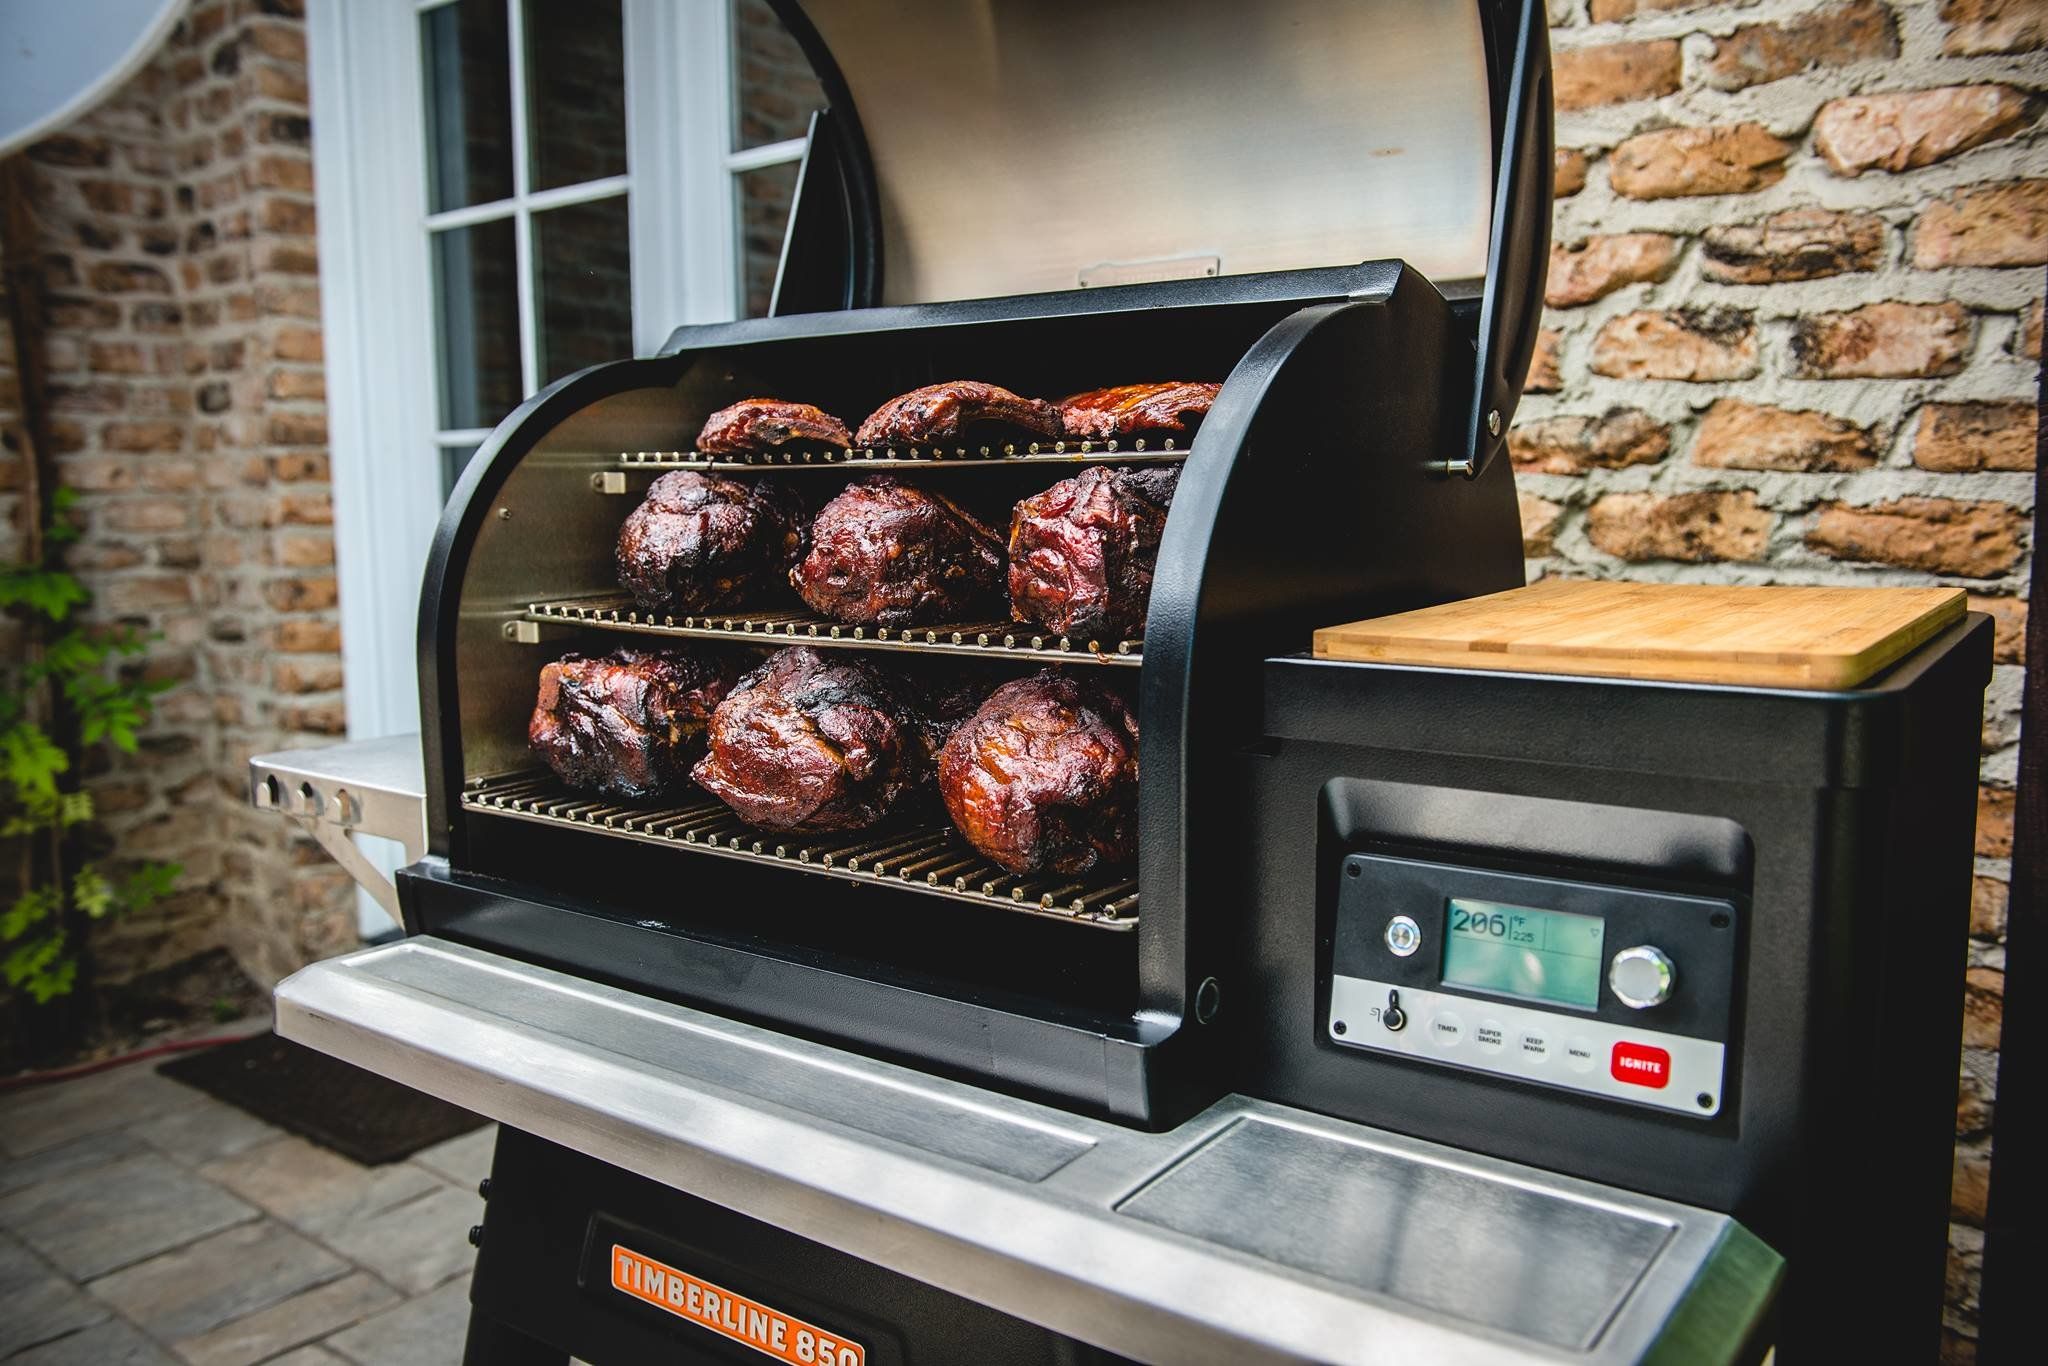 https://www.gearbrain.com/media-library/less-than-p-greater-than-all-of-traegers-outdoor-grills-have-wi-fi-for-alexa-and-google-assistant-control-less-than-p-greater-than.jpg?id=23413908